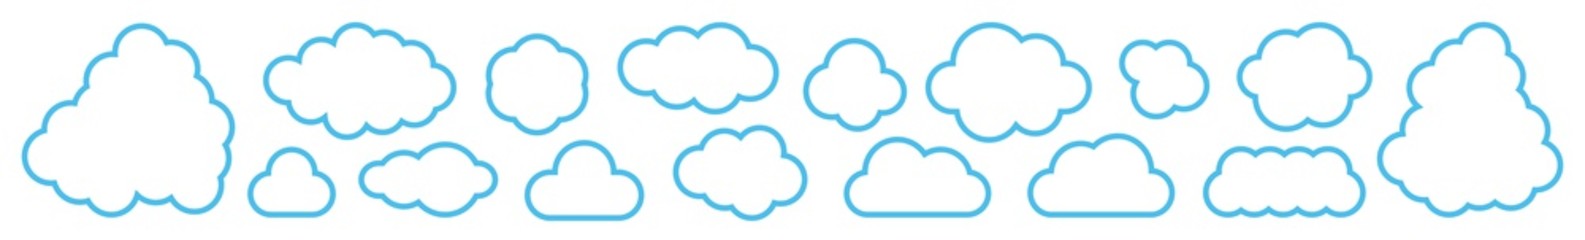 Cloud Icon Blue Line | Clouds Illustration | Weather Climate Symbol | Computing Storage Logo | Cartoon Bubble Sign | Isolated | Variations